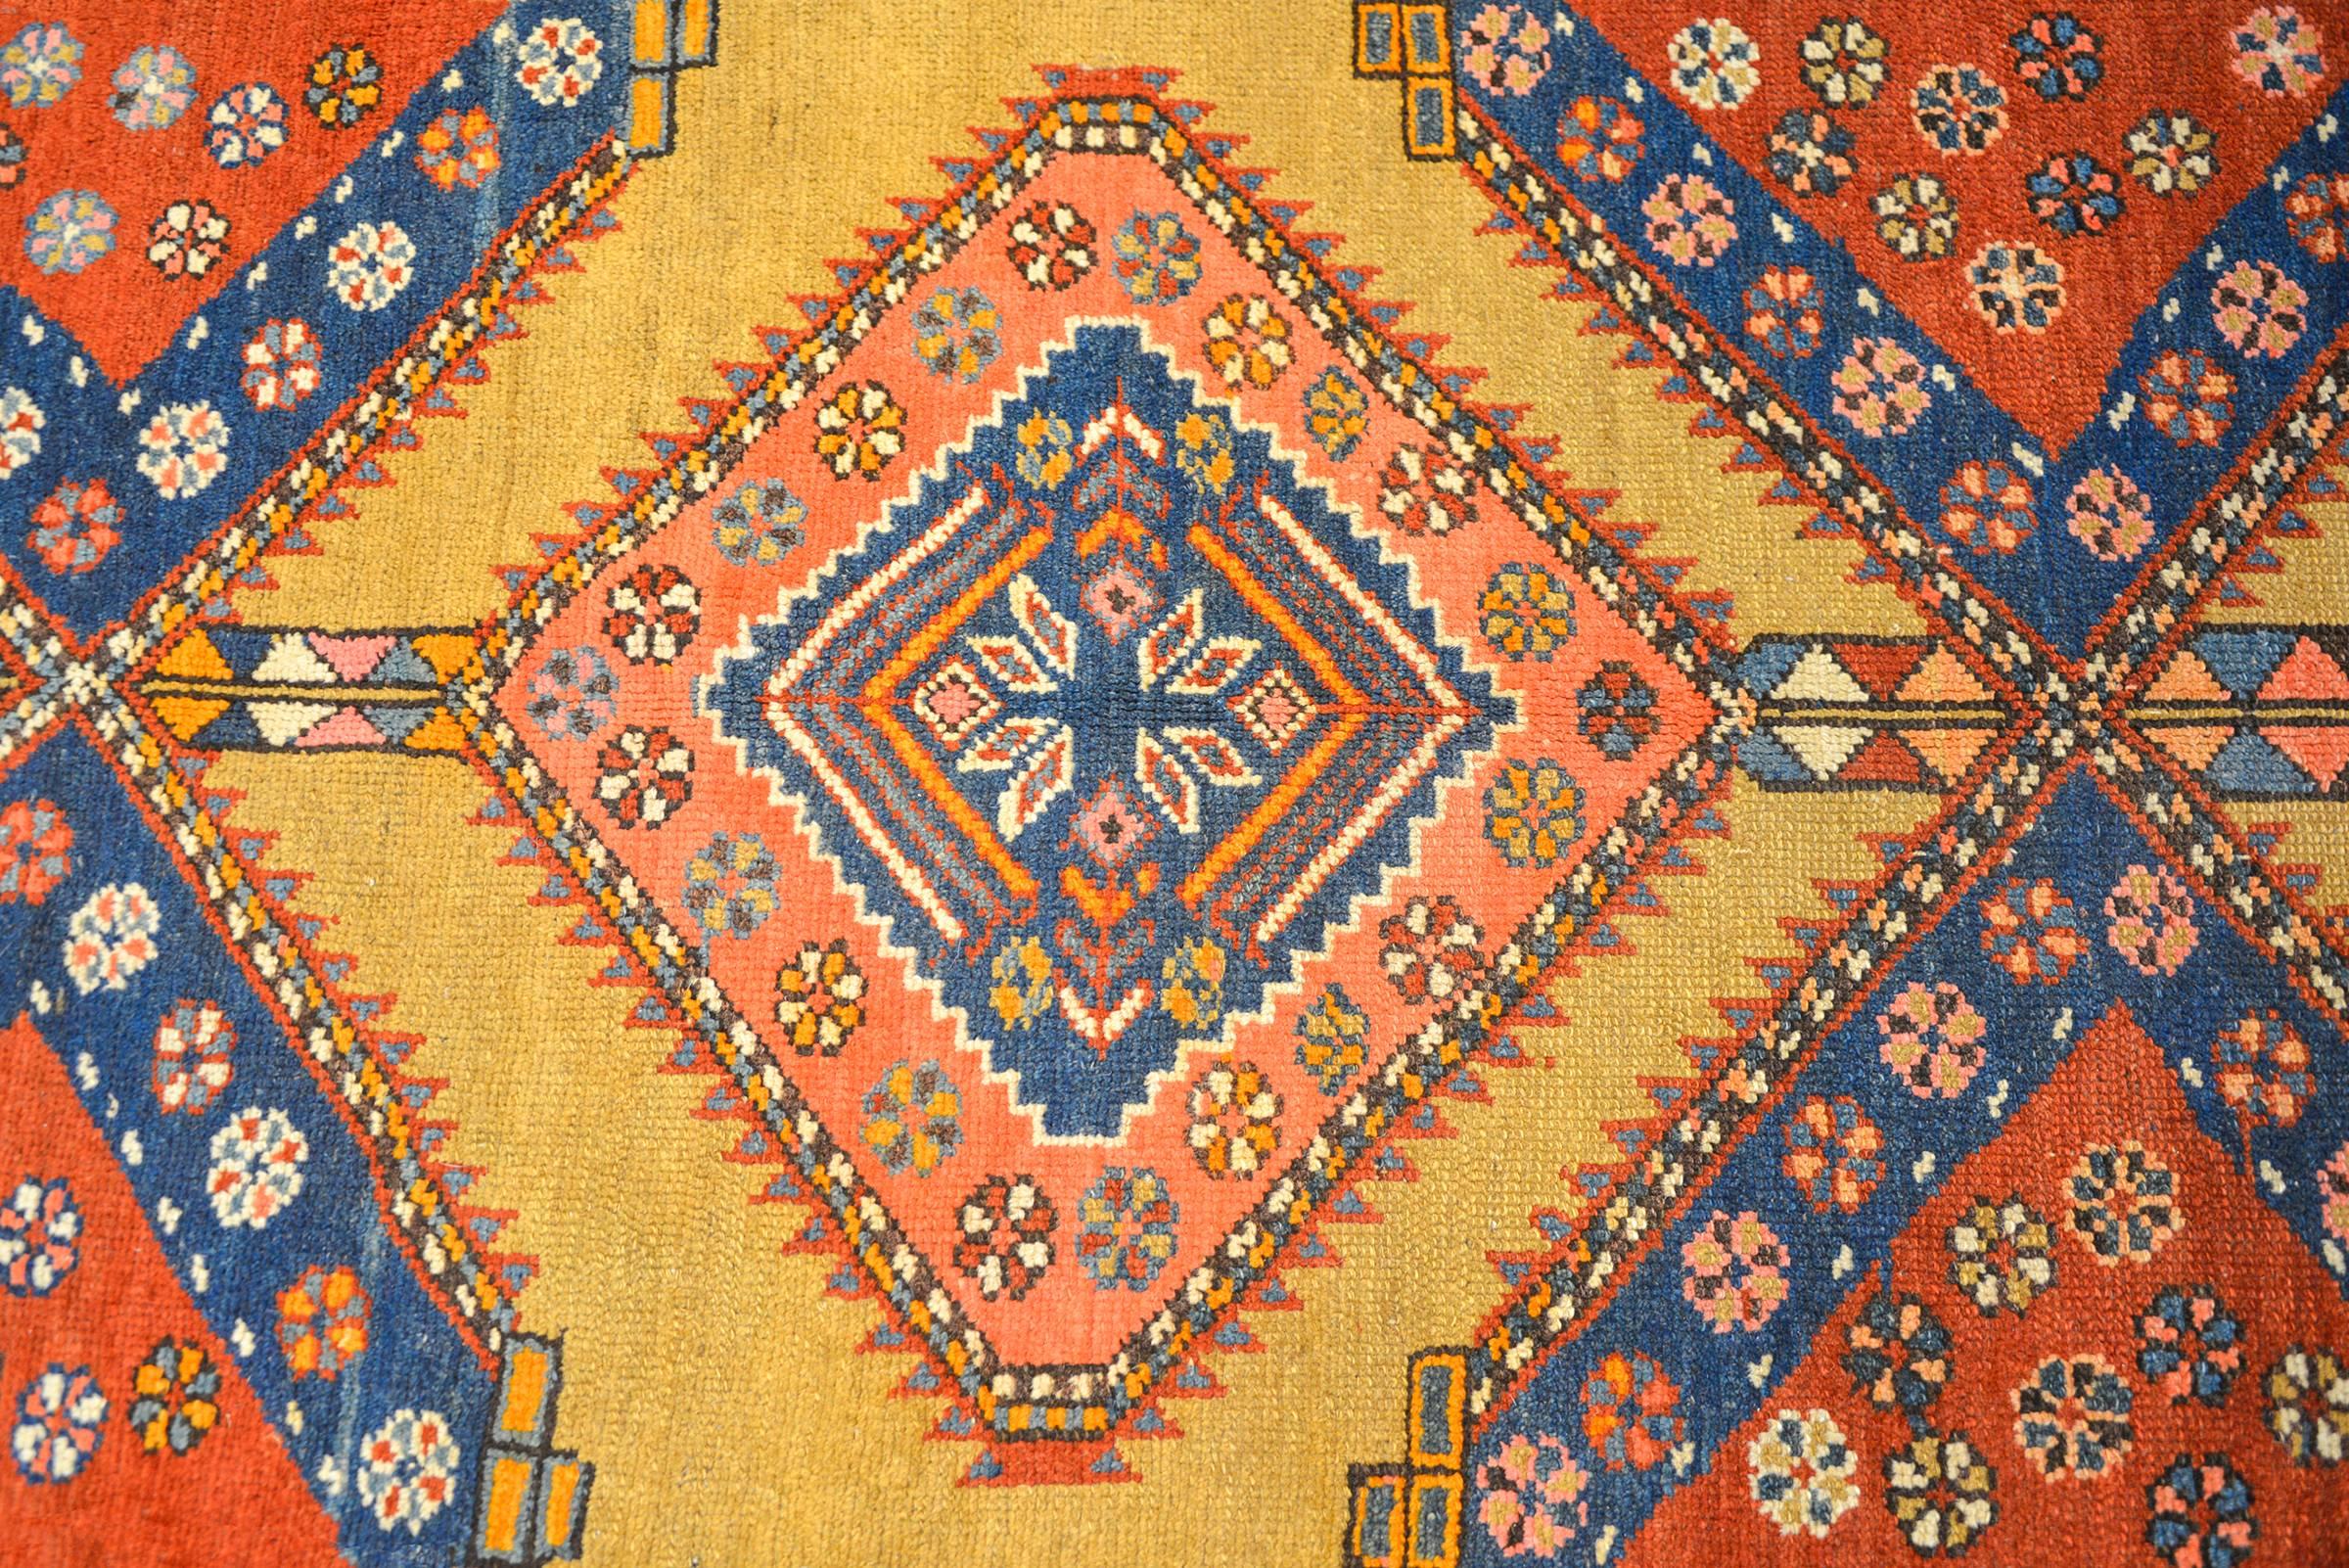 An extraordinary 19th century Persian Serab runner with a wonderful overall geometric pattern composed of several diamond medallions with multicolored flowers on a natural camel hair ground. The border is complementary in color with two diagonal